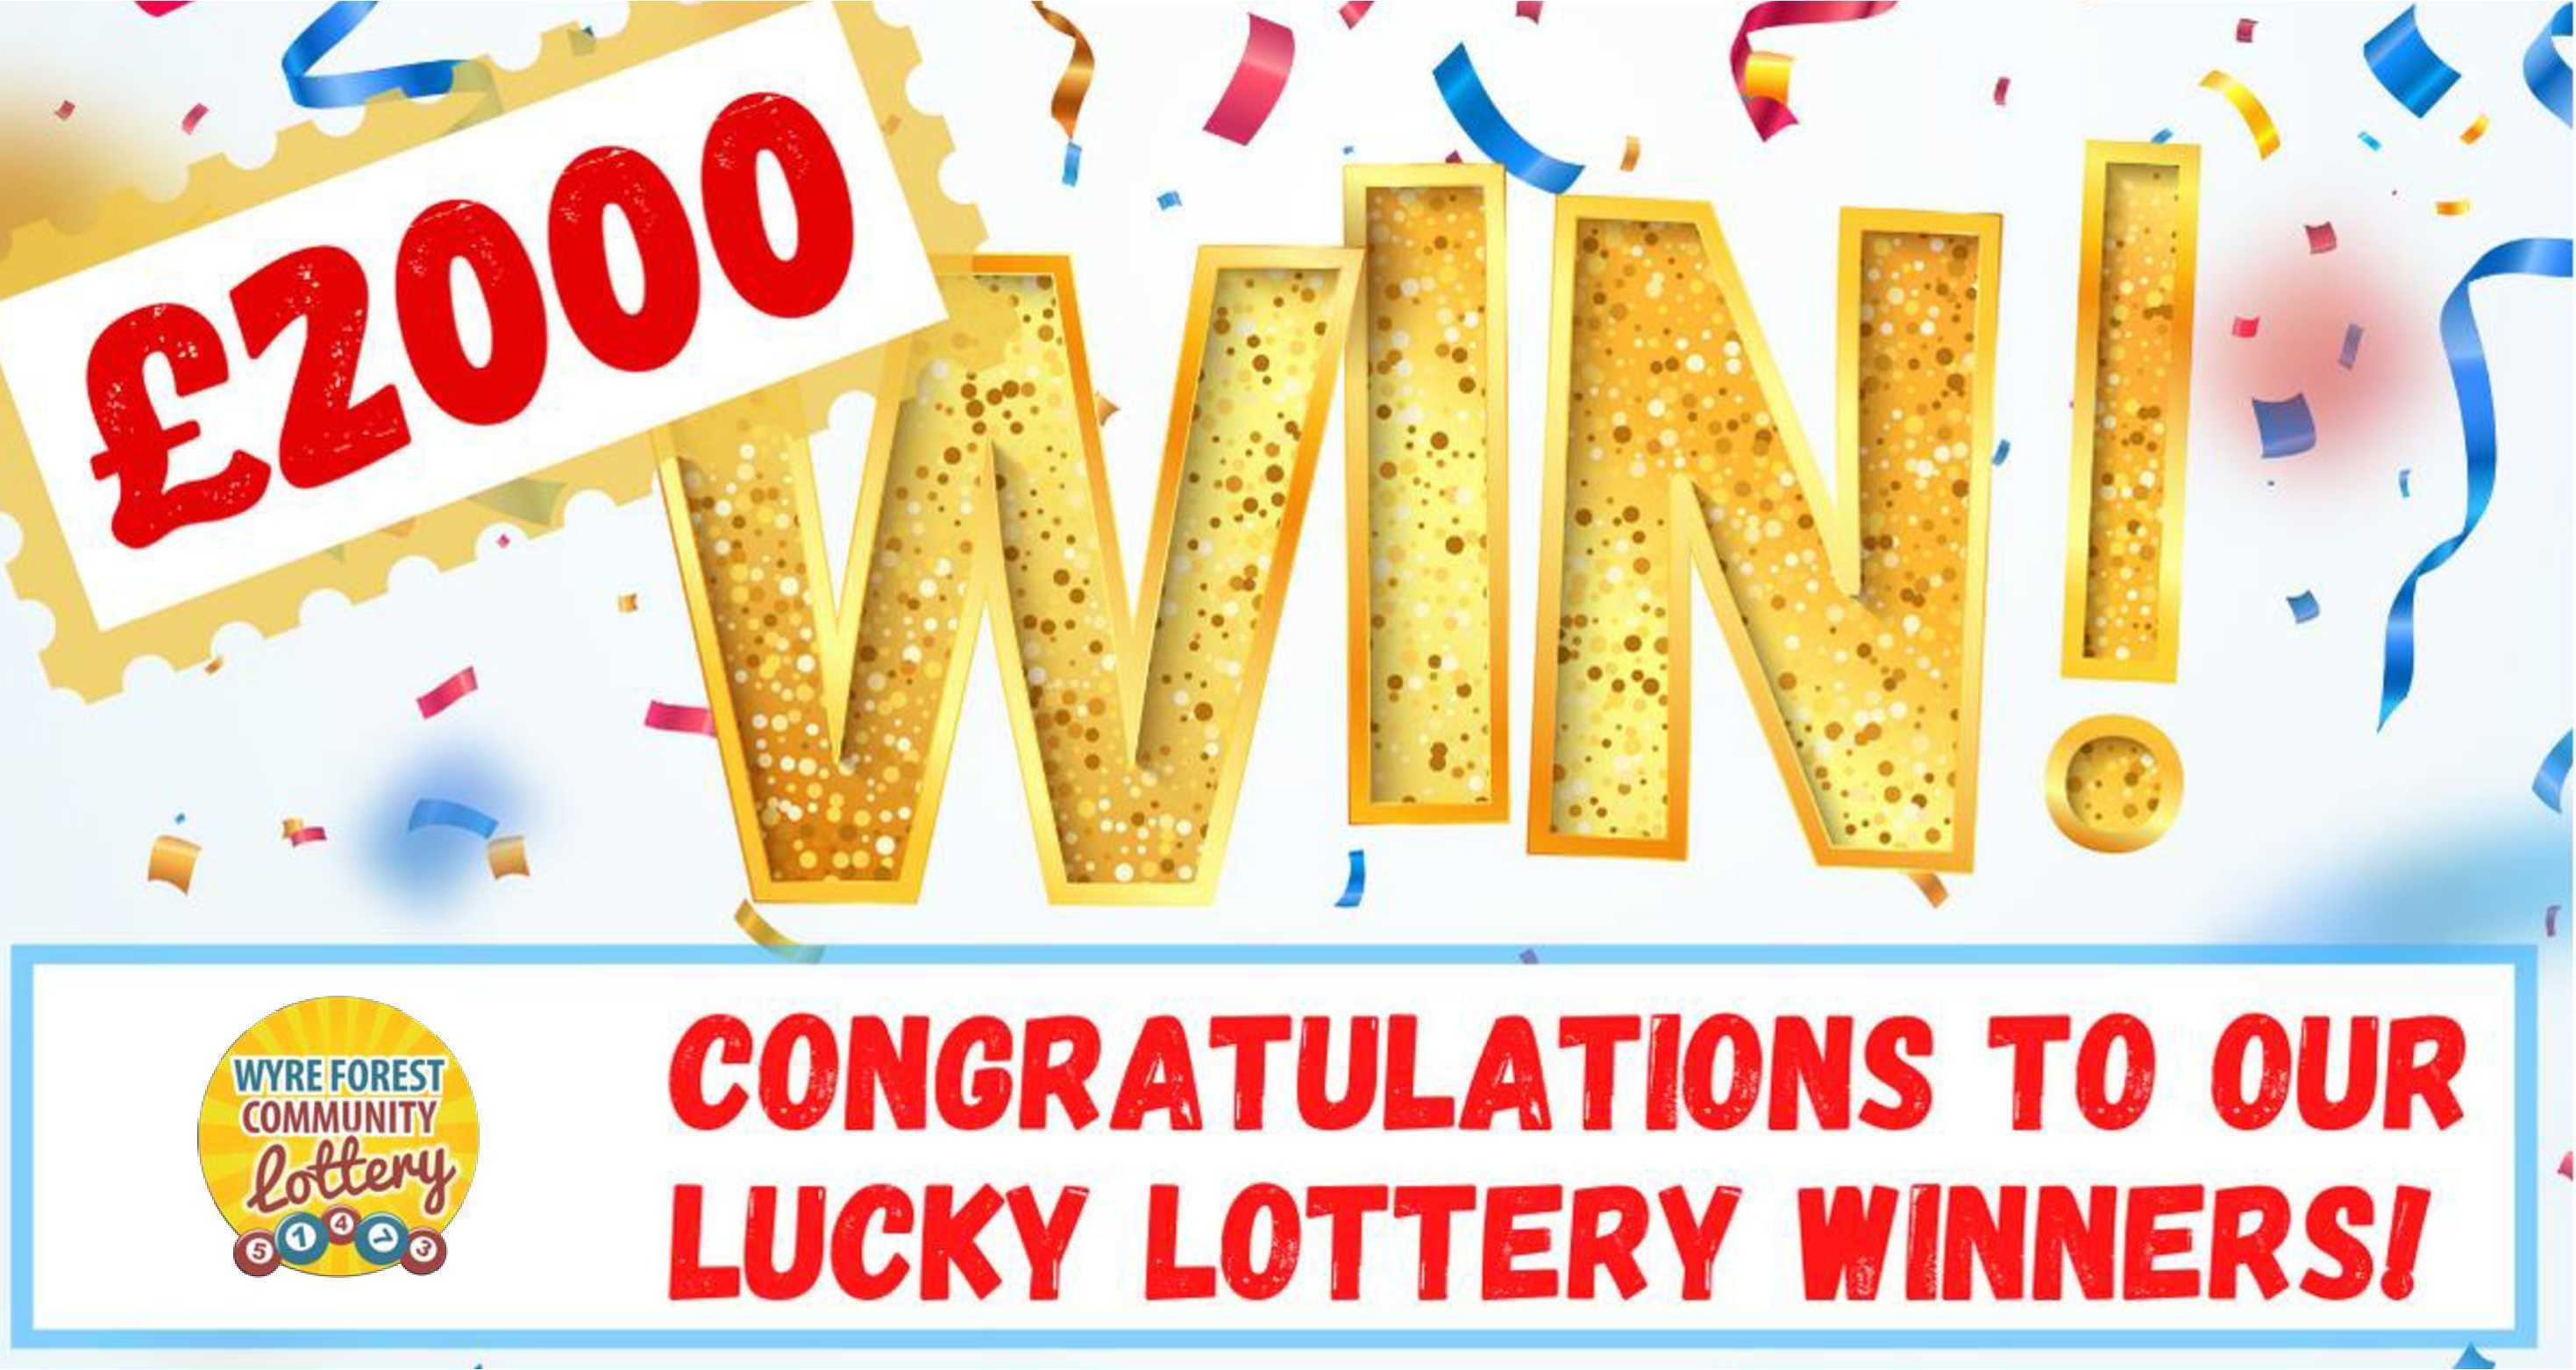 Infographic: congratulations to our lucky Wyre Forest Community Lottery winner of £2000